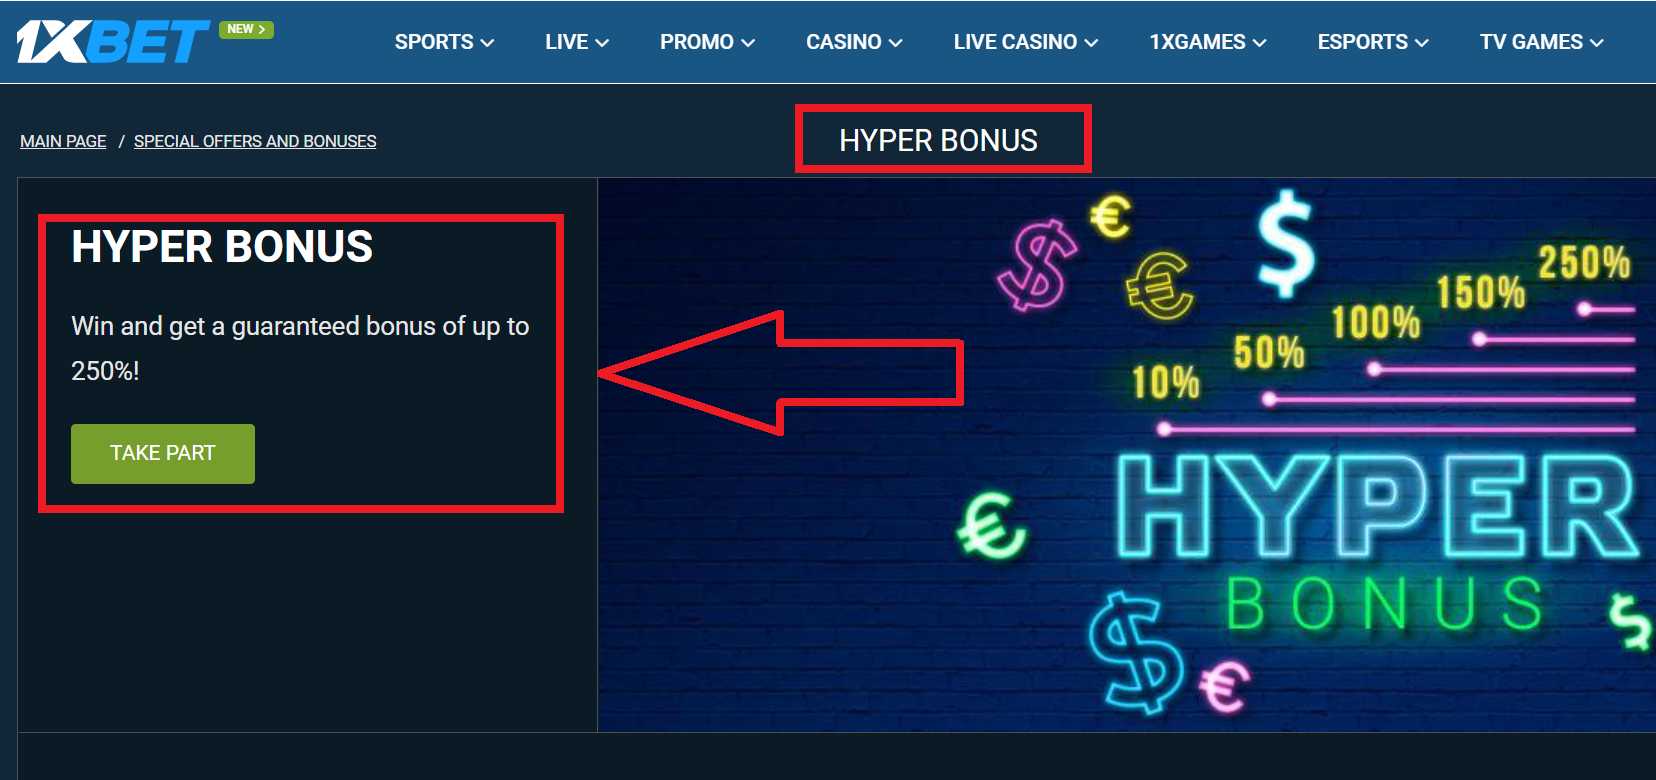 How to correctly apply the 1xBet bonus code from our site